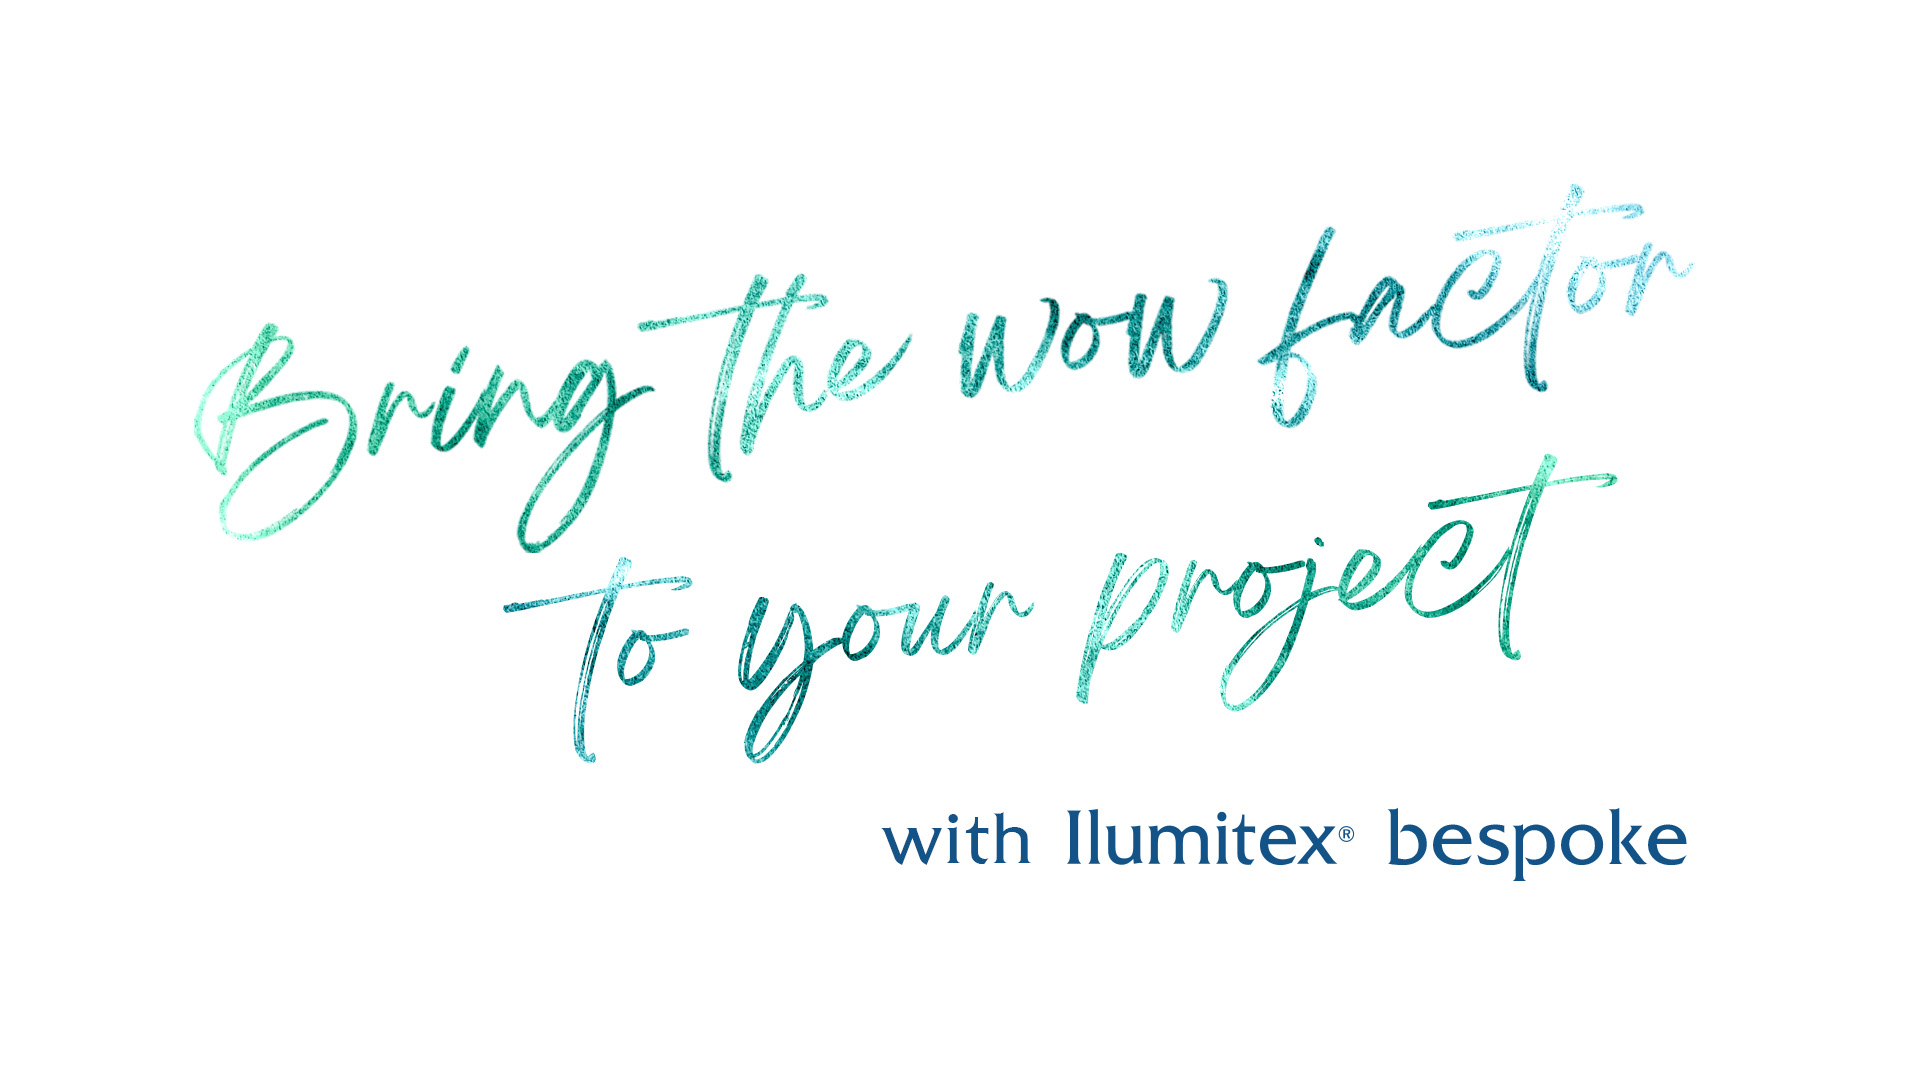 Bring the wow factor to oyur project with Ilumitex® bespoke